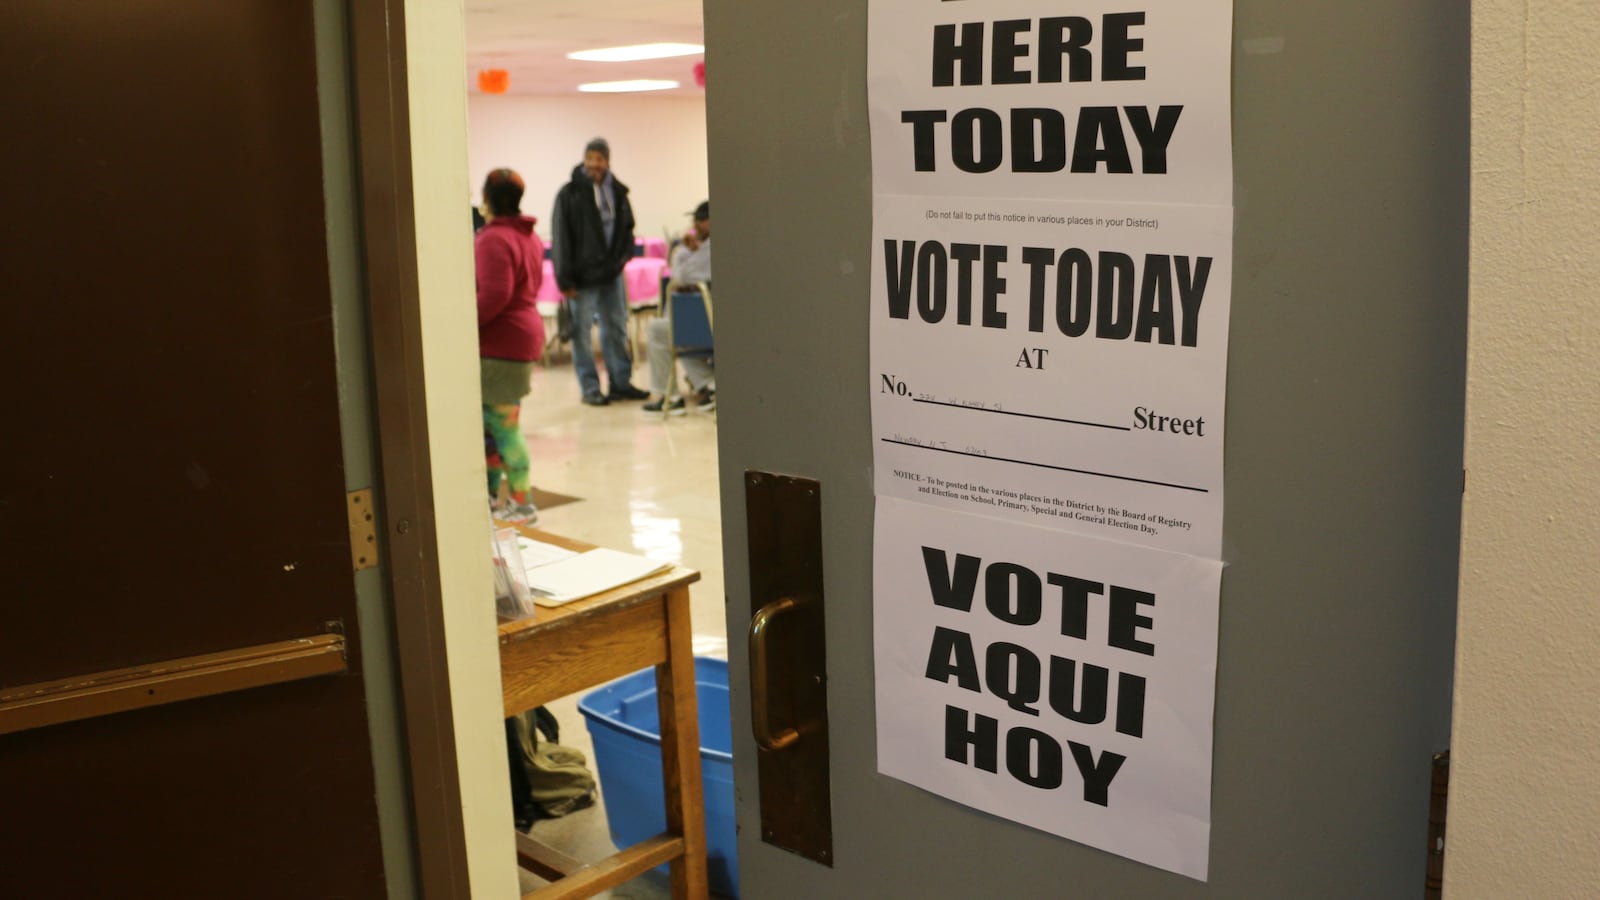 A door with white signs and black words that says "Vote here today. Vote today. and Vote aqui hoy." There are people in the background inside the room.